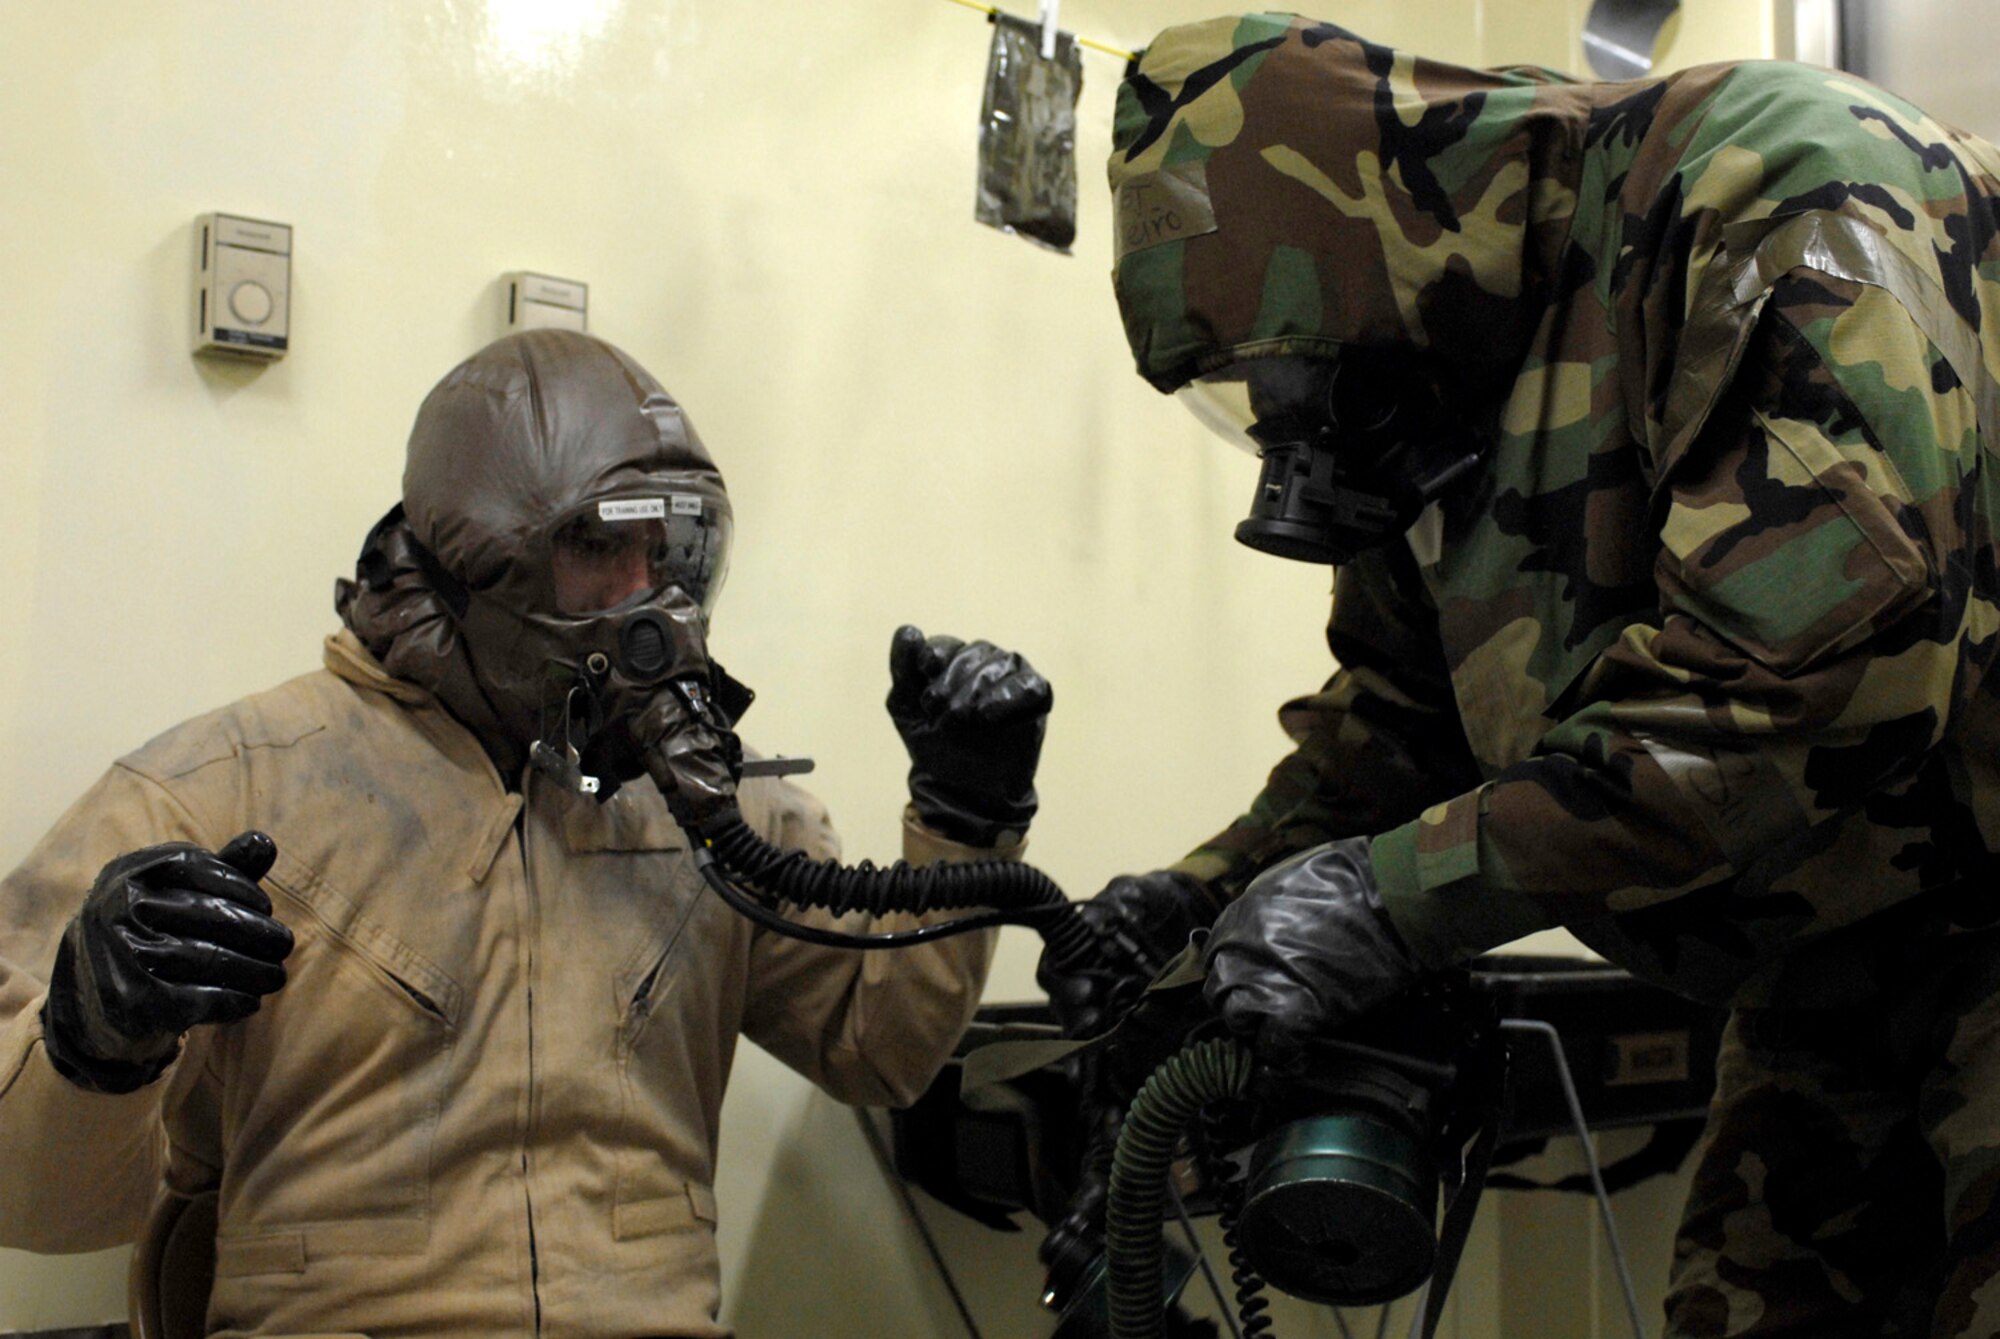 KUNSAN AB, Republic of Korea ? Tech. Sergeant Luis Pineiro, 35th Fighter Squadron, checks the oxygen line of 1st Lt. Nathan Froh, 35th Fighter Squadron pilot, during the pilot?s decontamination here. The 8th Fighter Wing is currently undergoing an operational readiness inspection to test its ability to conduct its wartime mission. (U.S. Air Force photo by Senior Airman Darnell T. Cannady)